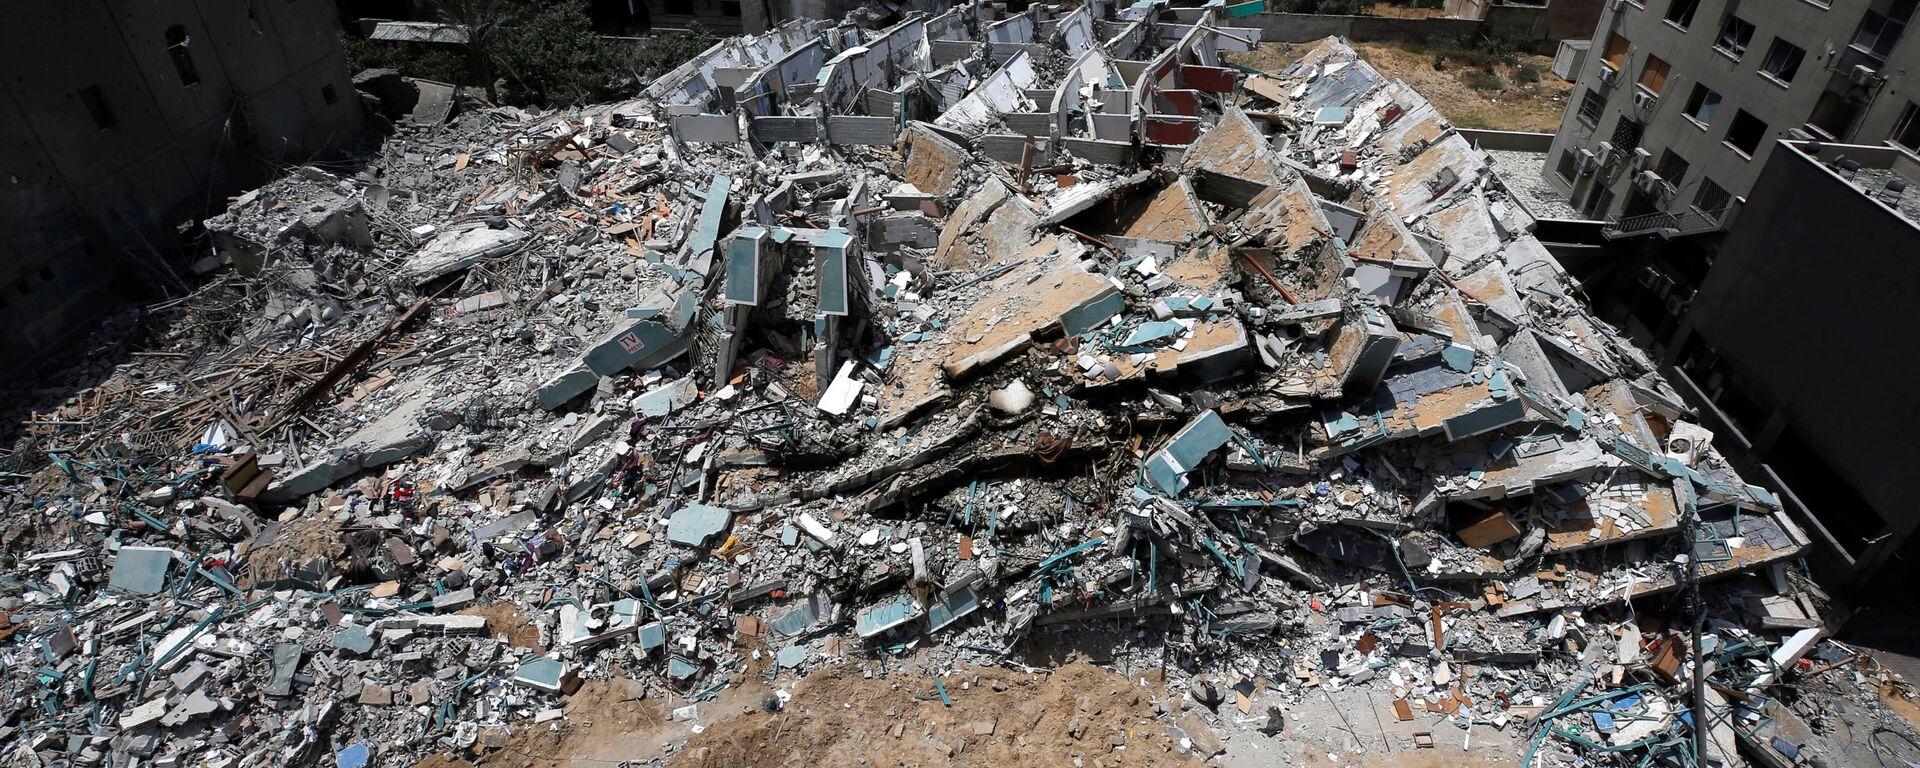 A view shows the remains of a tower building destroyed by Israeli missile strikes in the recent cross-border violence between Palestinian militants and Israel, following Israel-Hamas truce, in Gaza City May 21, 2021 - Sputnik International, 1920, 02.02.2022